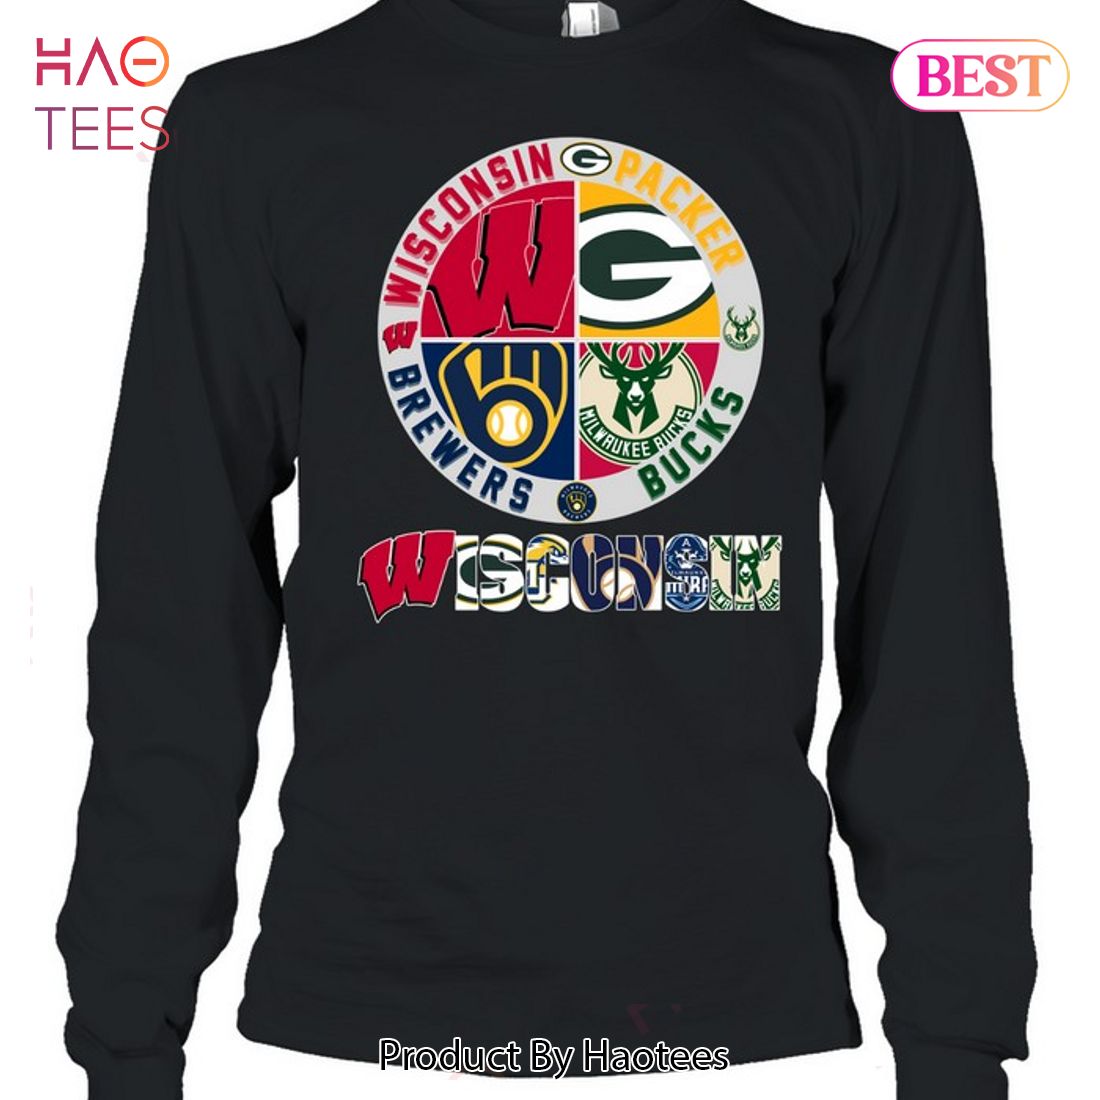 NEW Wisconsin Badgers Green Bay Packers Milwaukee Brewers And